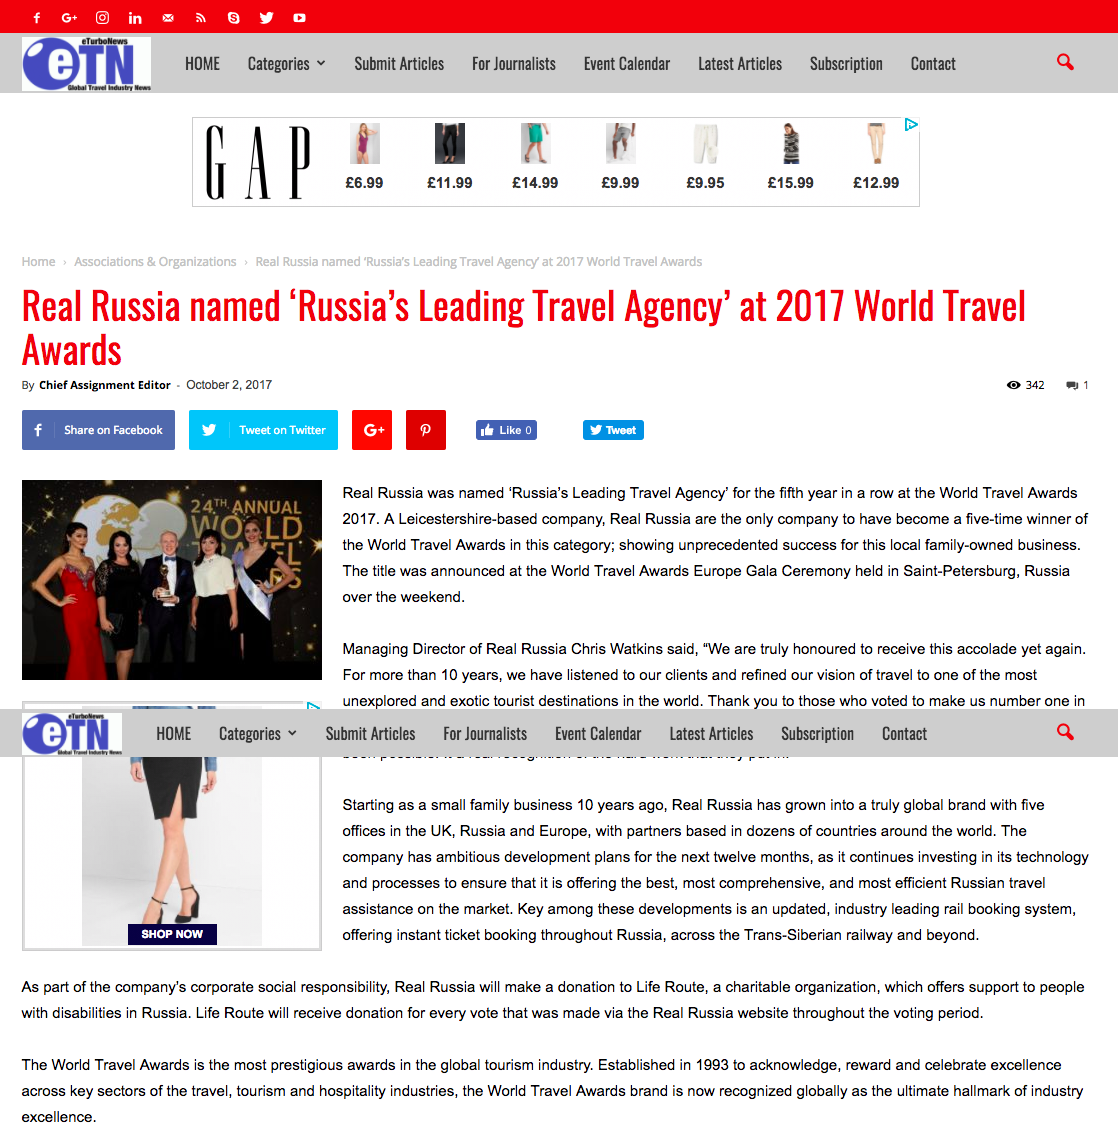 Real Russia named ‘Russia’s Leading Travel Agency’ at 2017 World Travel Awards